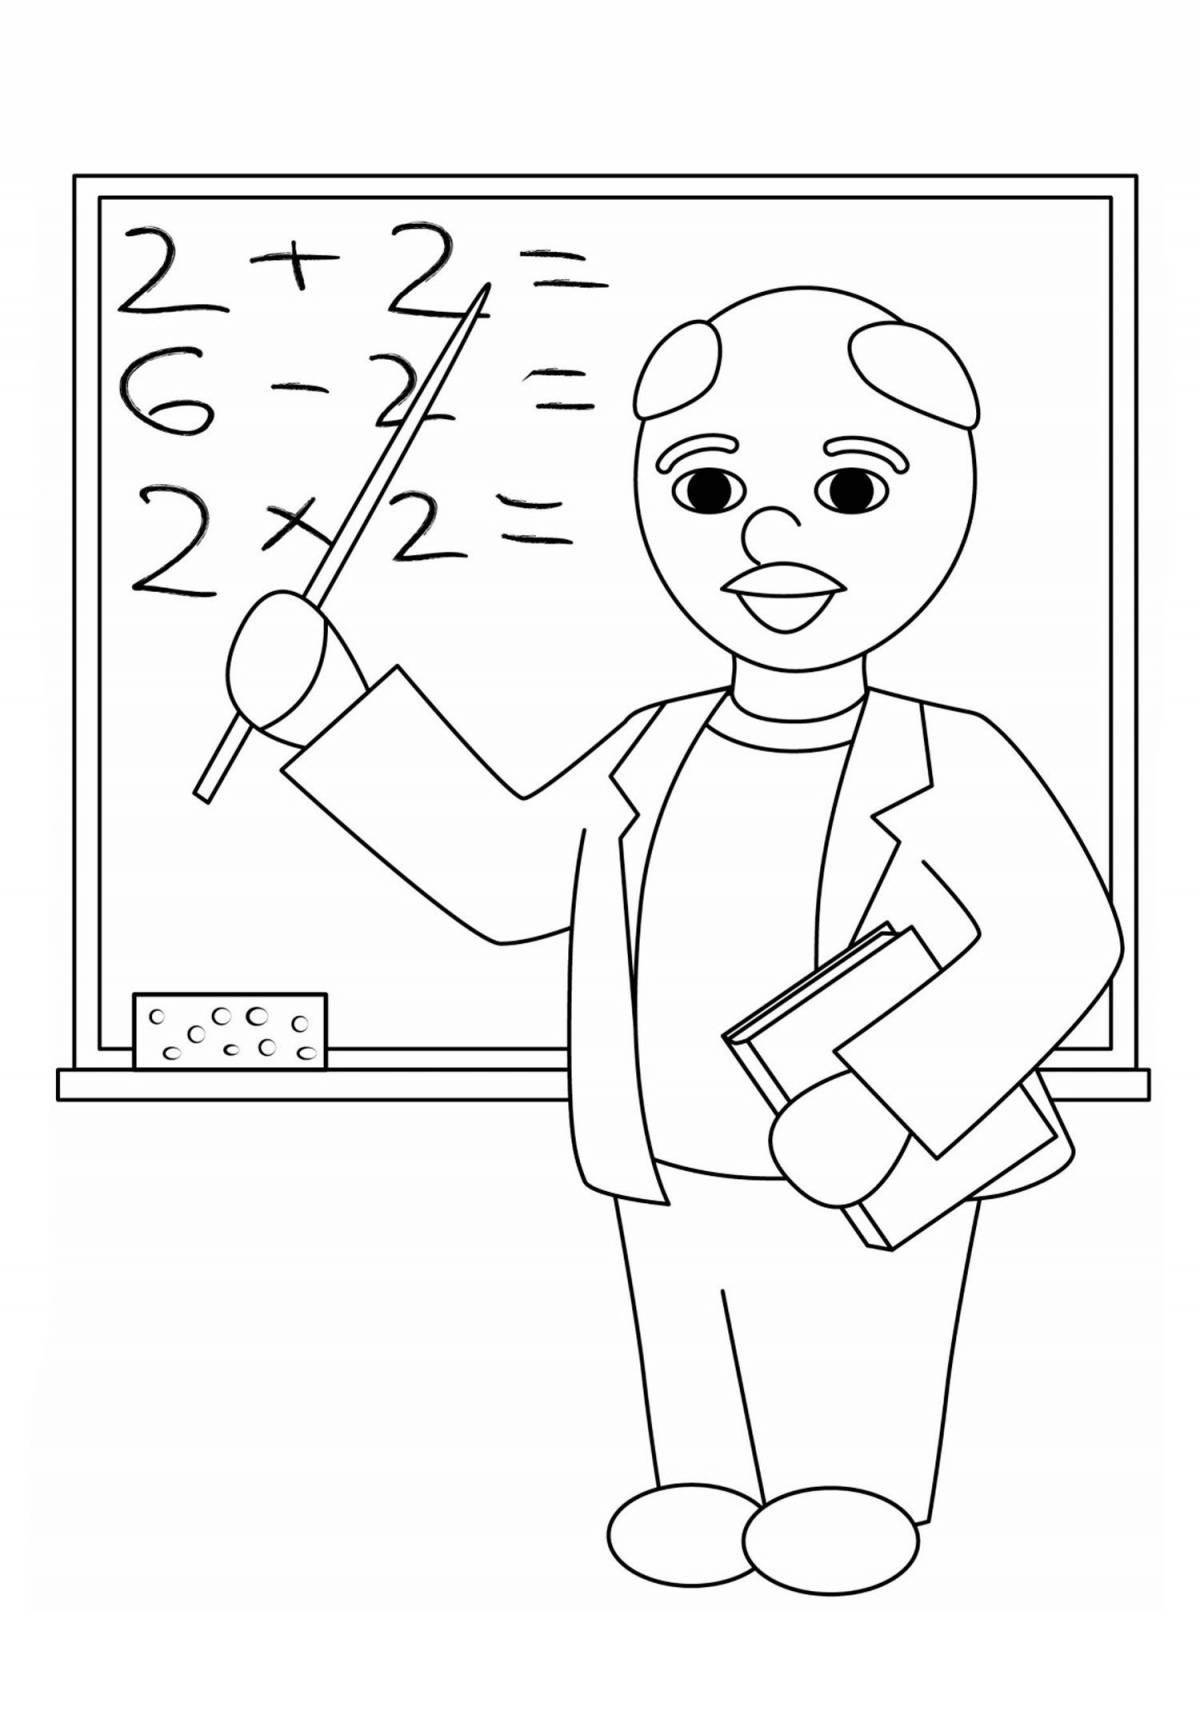 Creative teacher coloring book for students